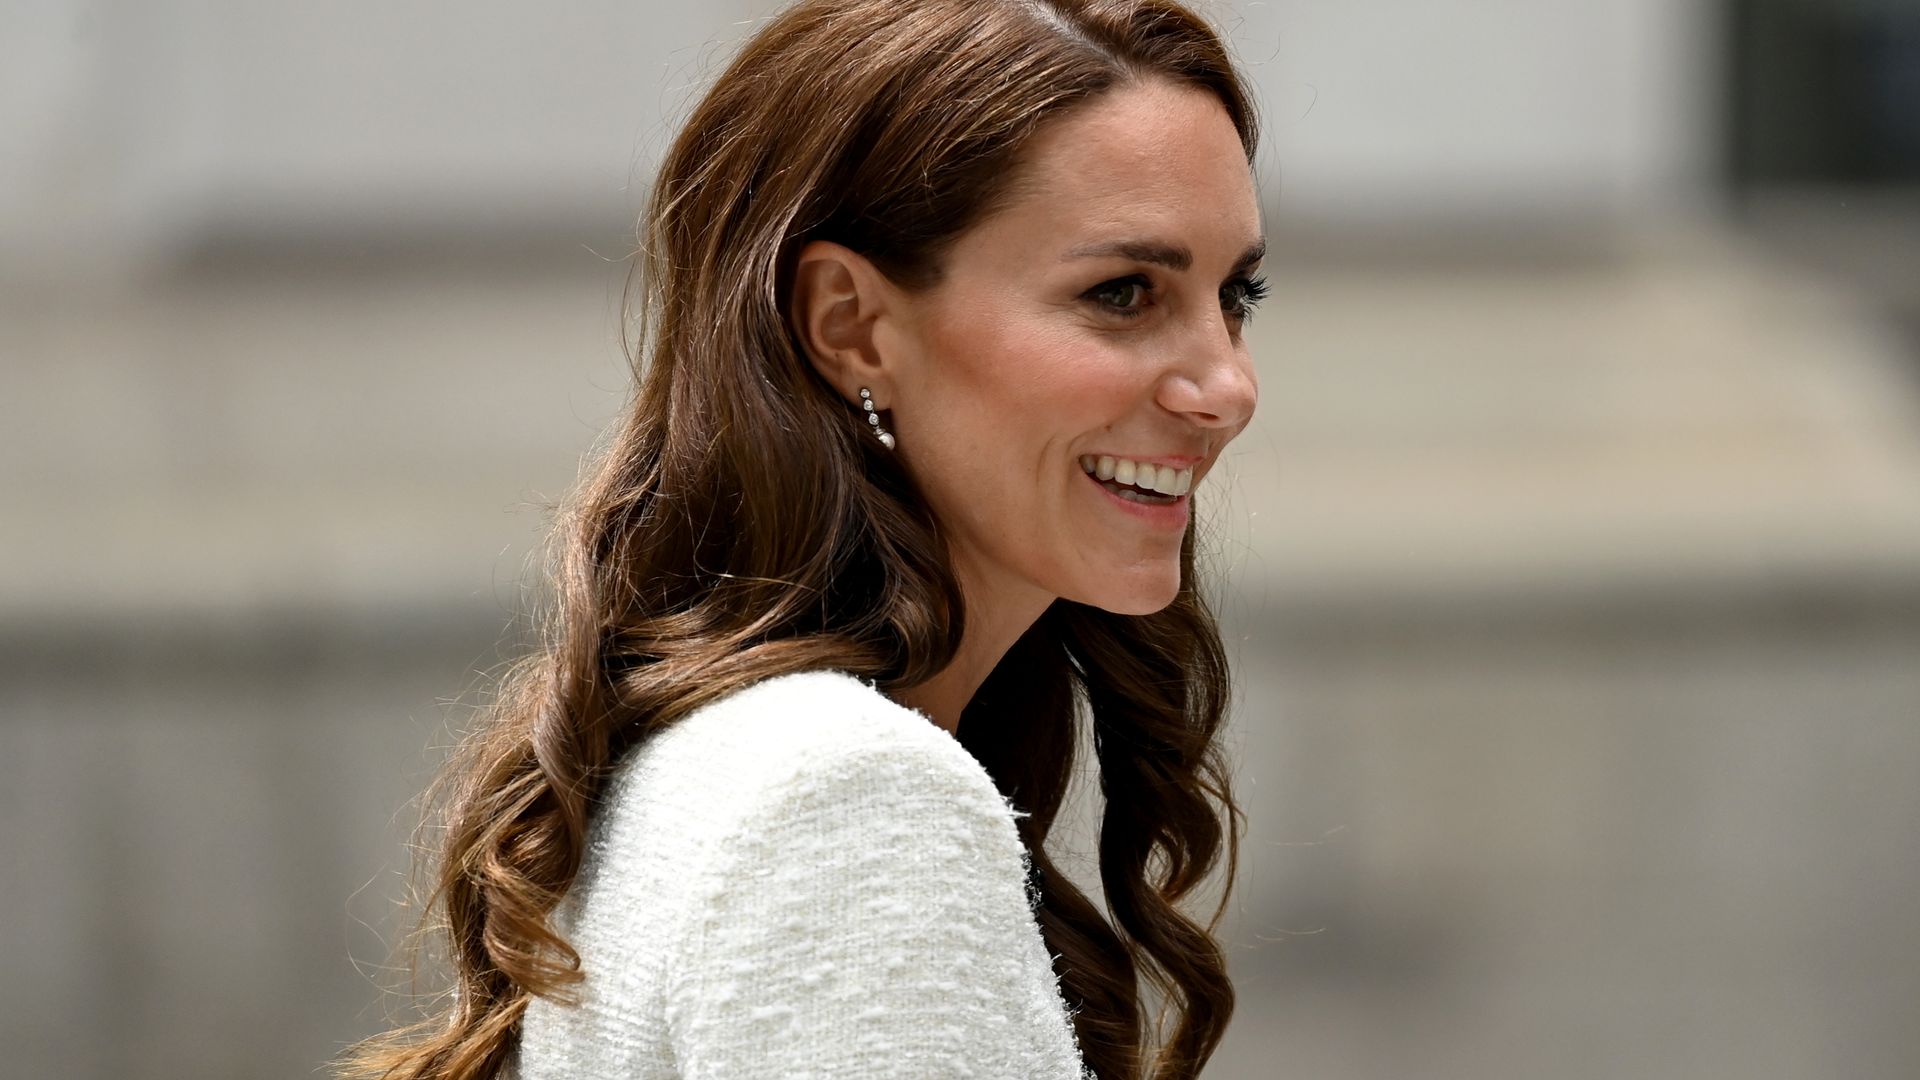 We Found Kate Middleton's Favorite Pants & 6 Lookalikes to Shop